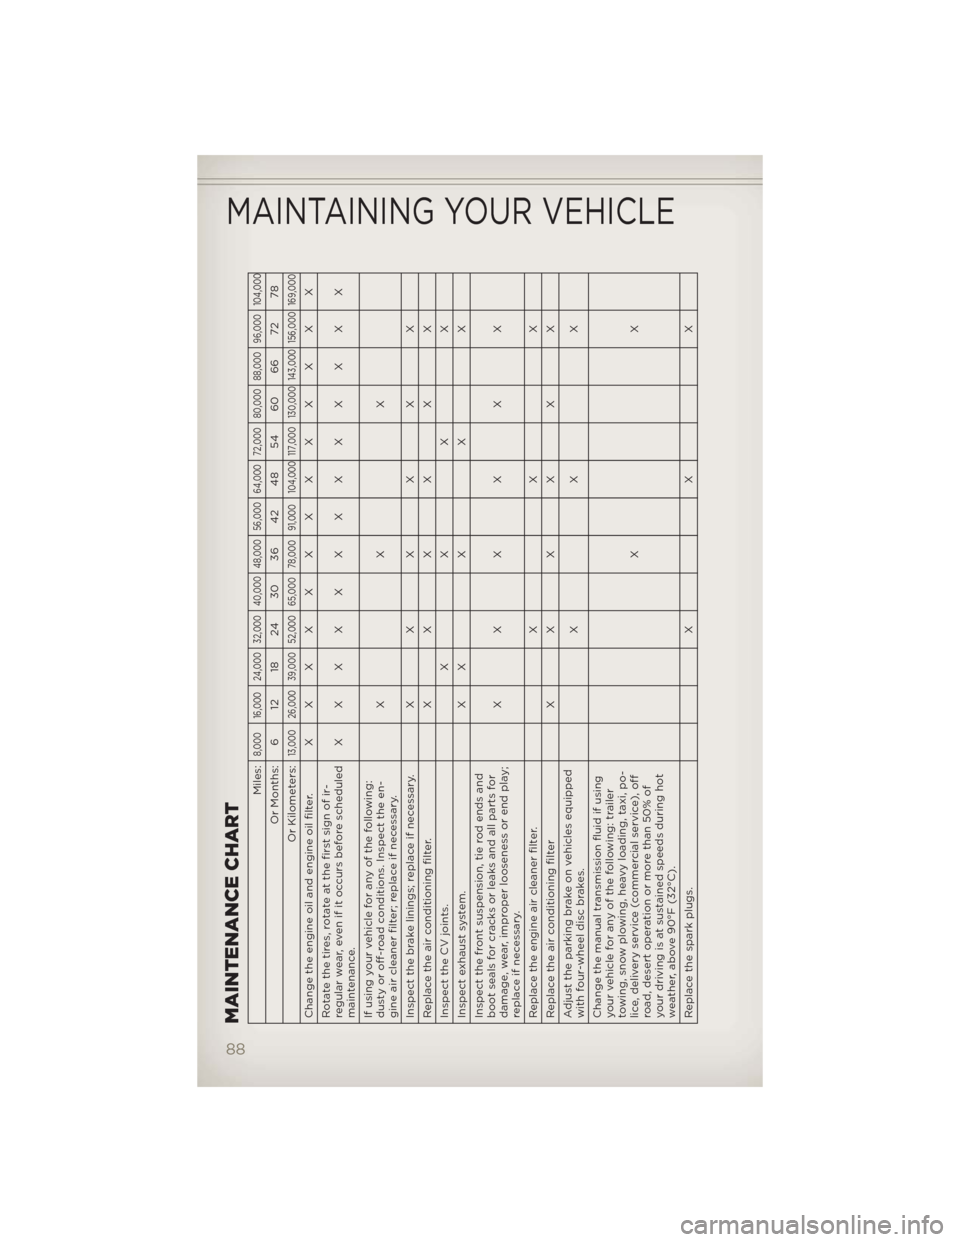 JEEP PATRIOT 2012 1.G User Guide MAINTENANCE CHART
Miles:
8,000 16,000 24,000 32,000 40,000 48,000 56,000 64,000 72,000 80,000 88,000 96,000 104,000
Or Months: 6 12 18 24 30 36 42 48 54 60 66 72 78
Or Kilometers:
13,000 26,000 39,000